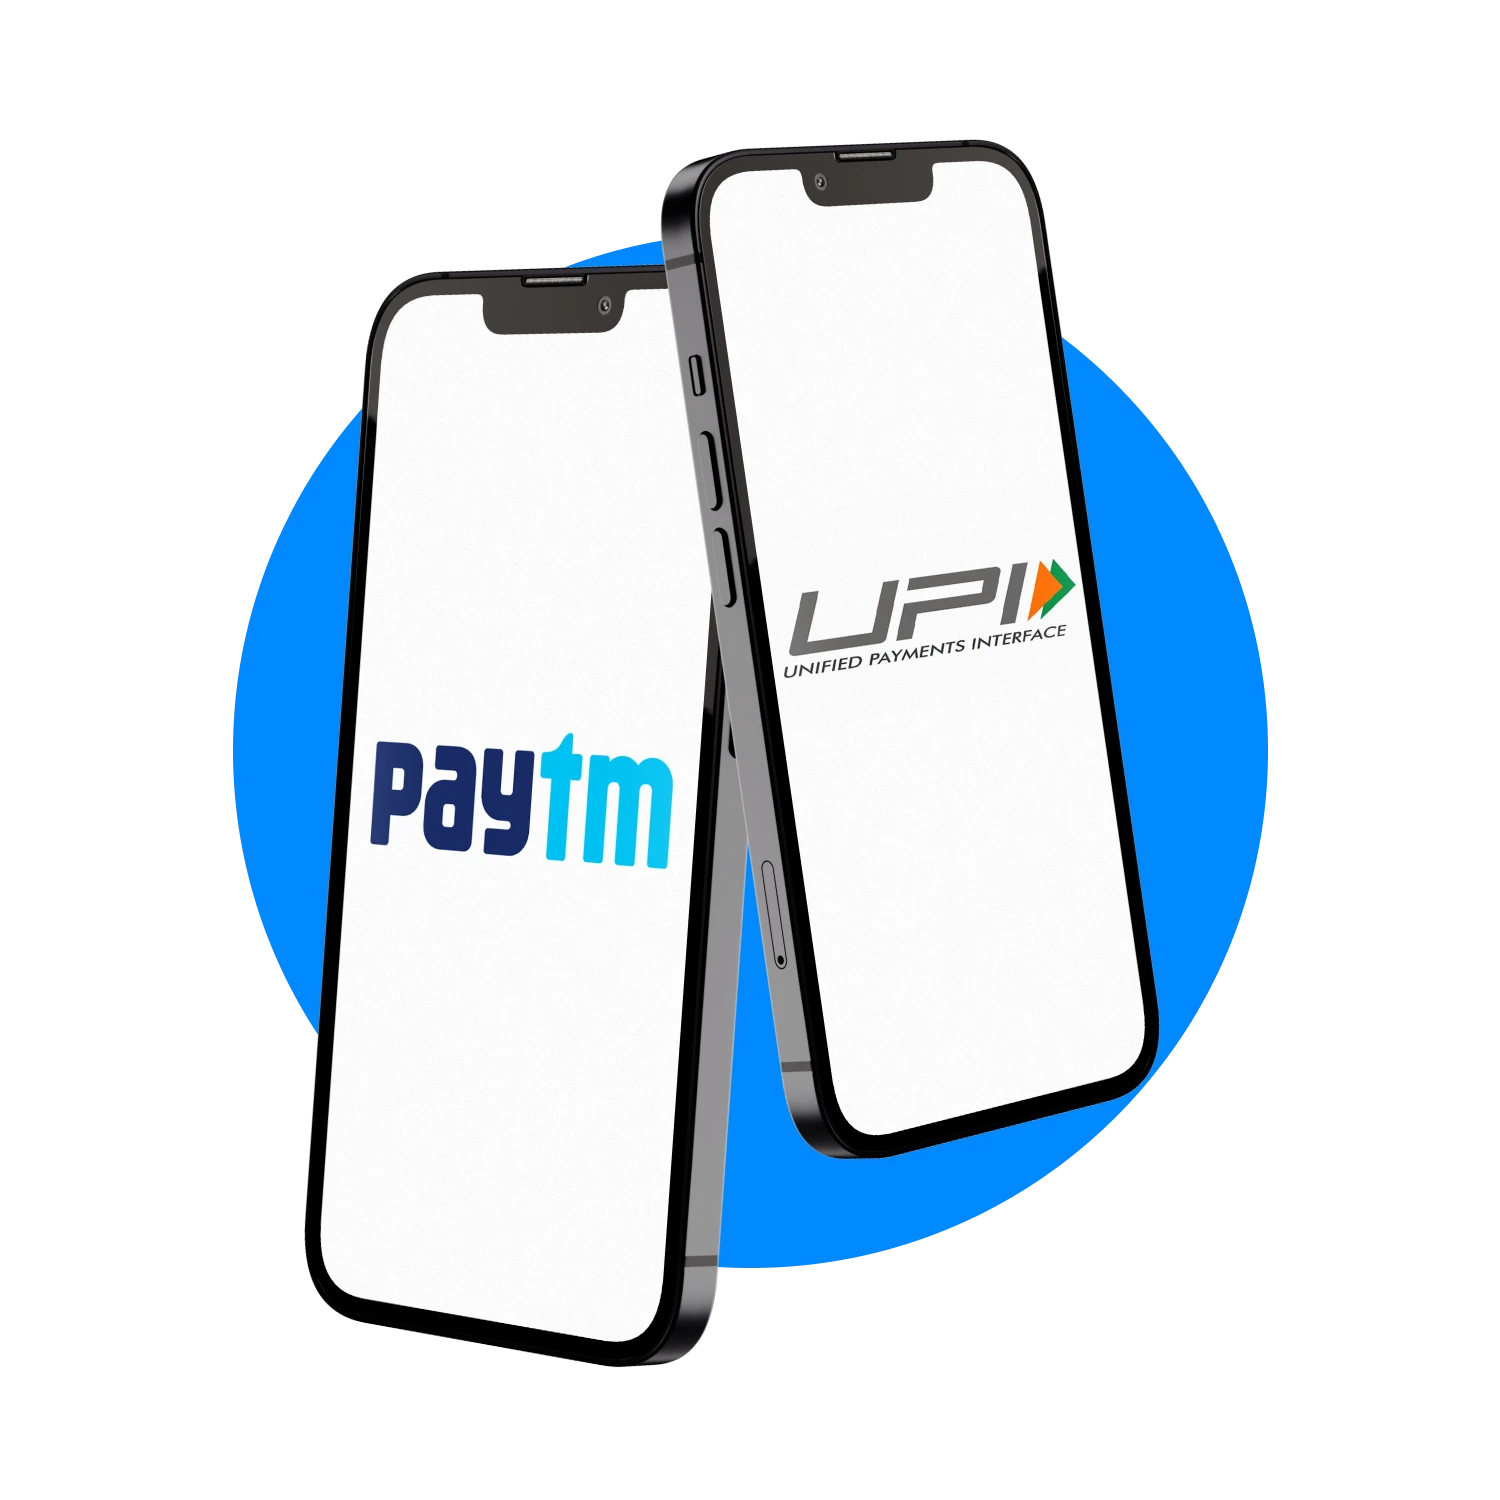 Learn about the most popular online payment methods working in India.